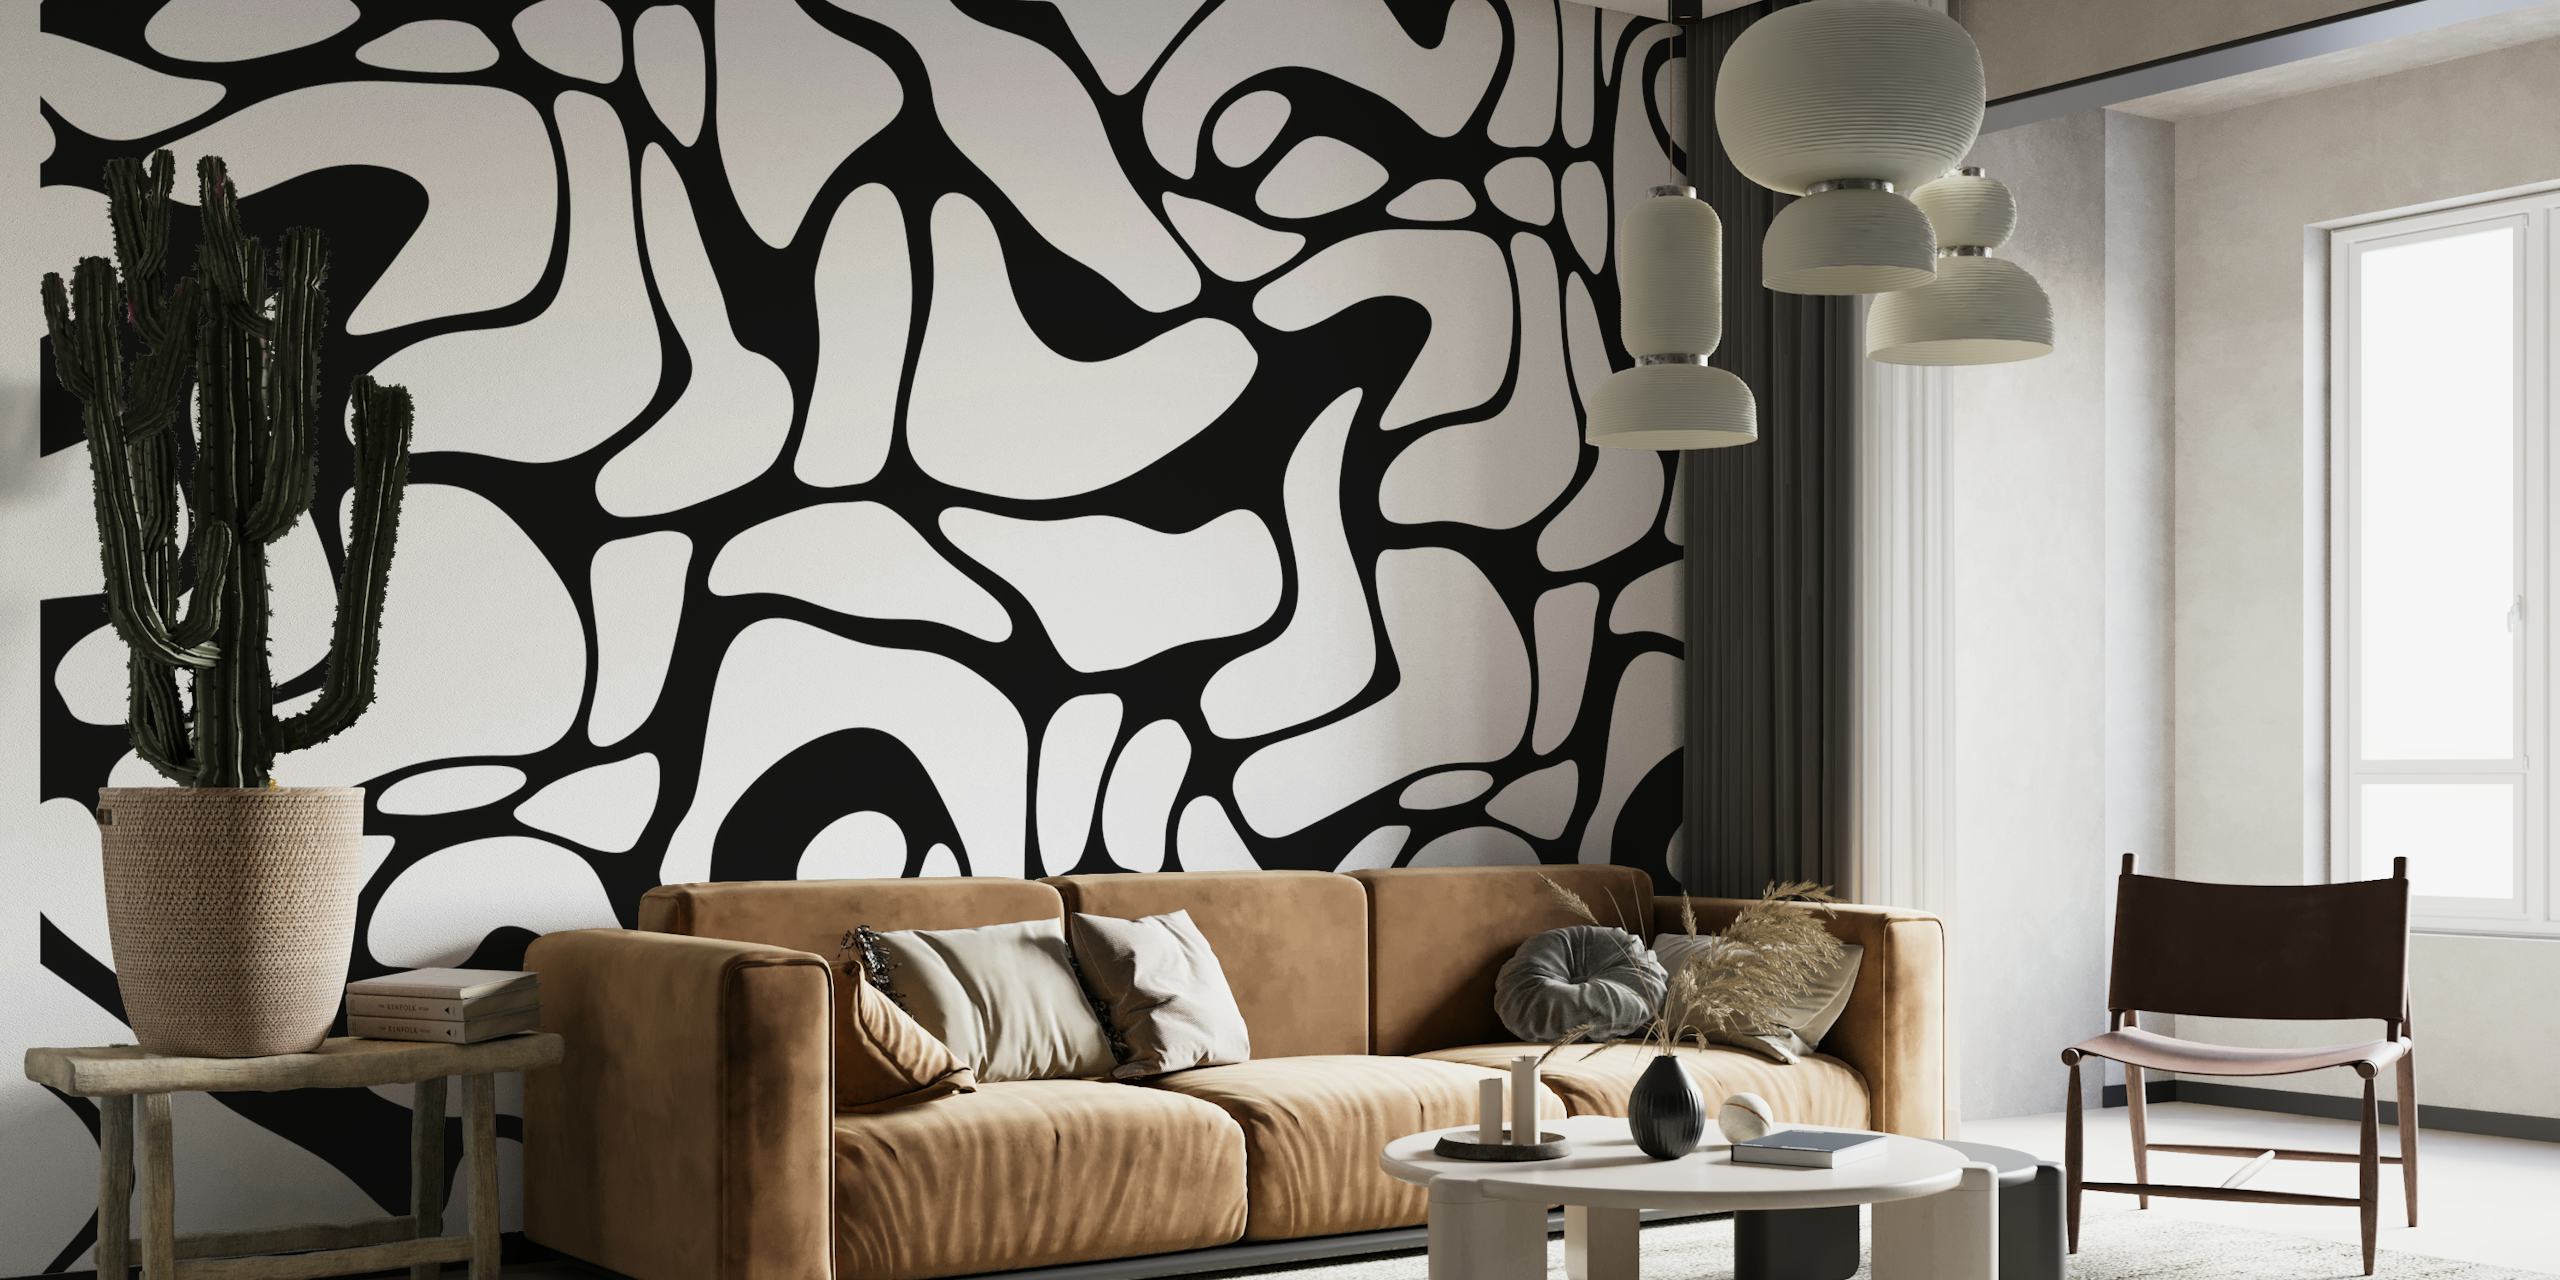 Abstract black and white organic shapes wall mural